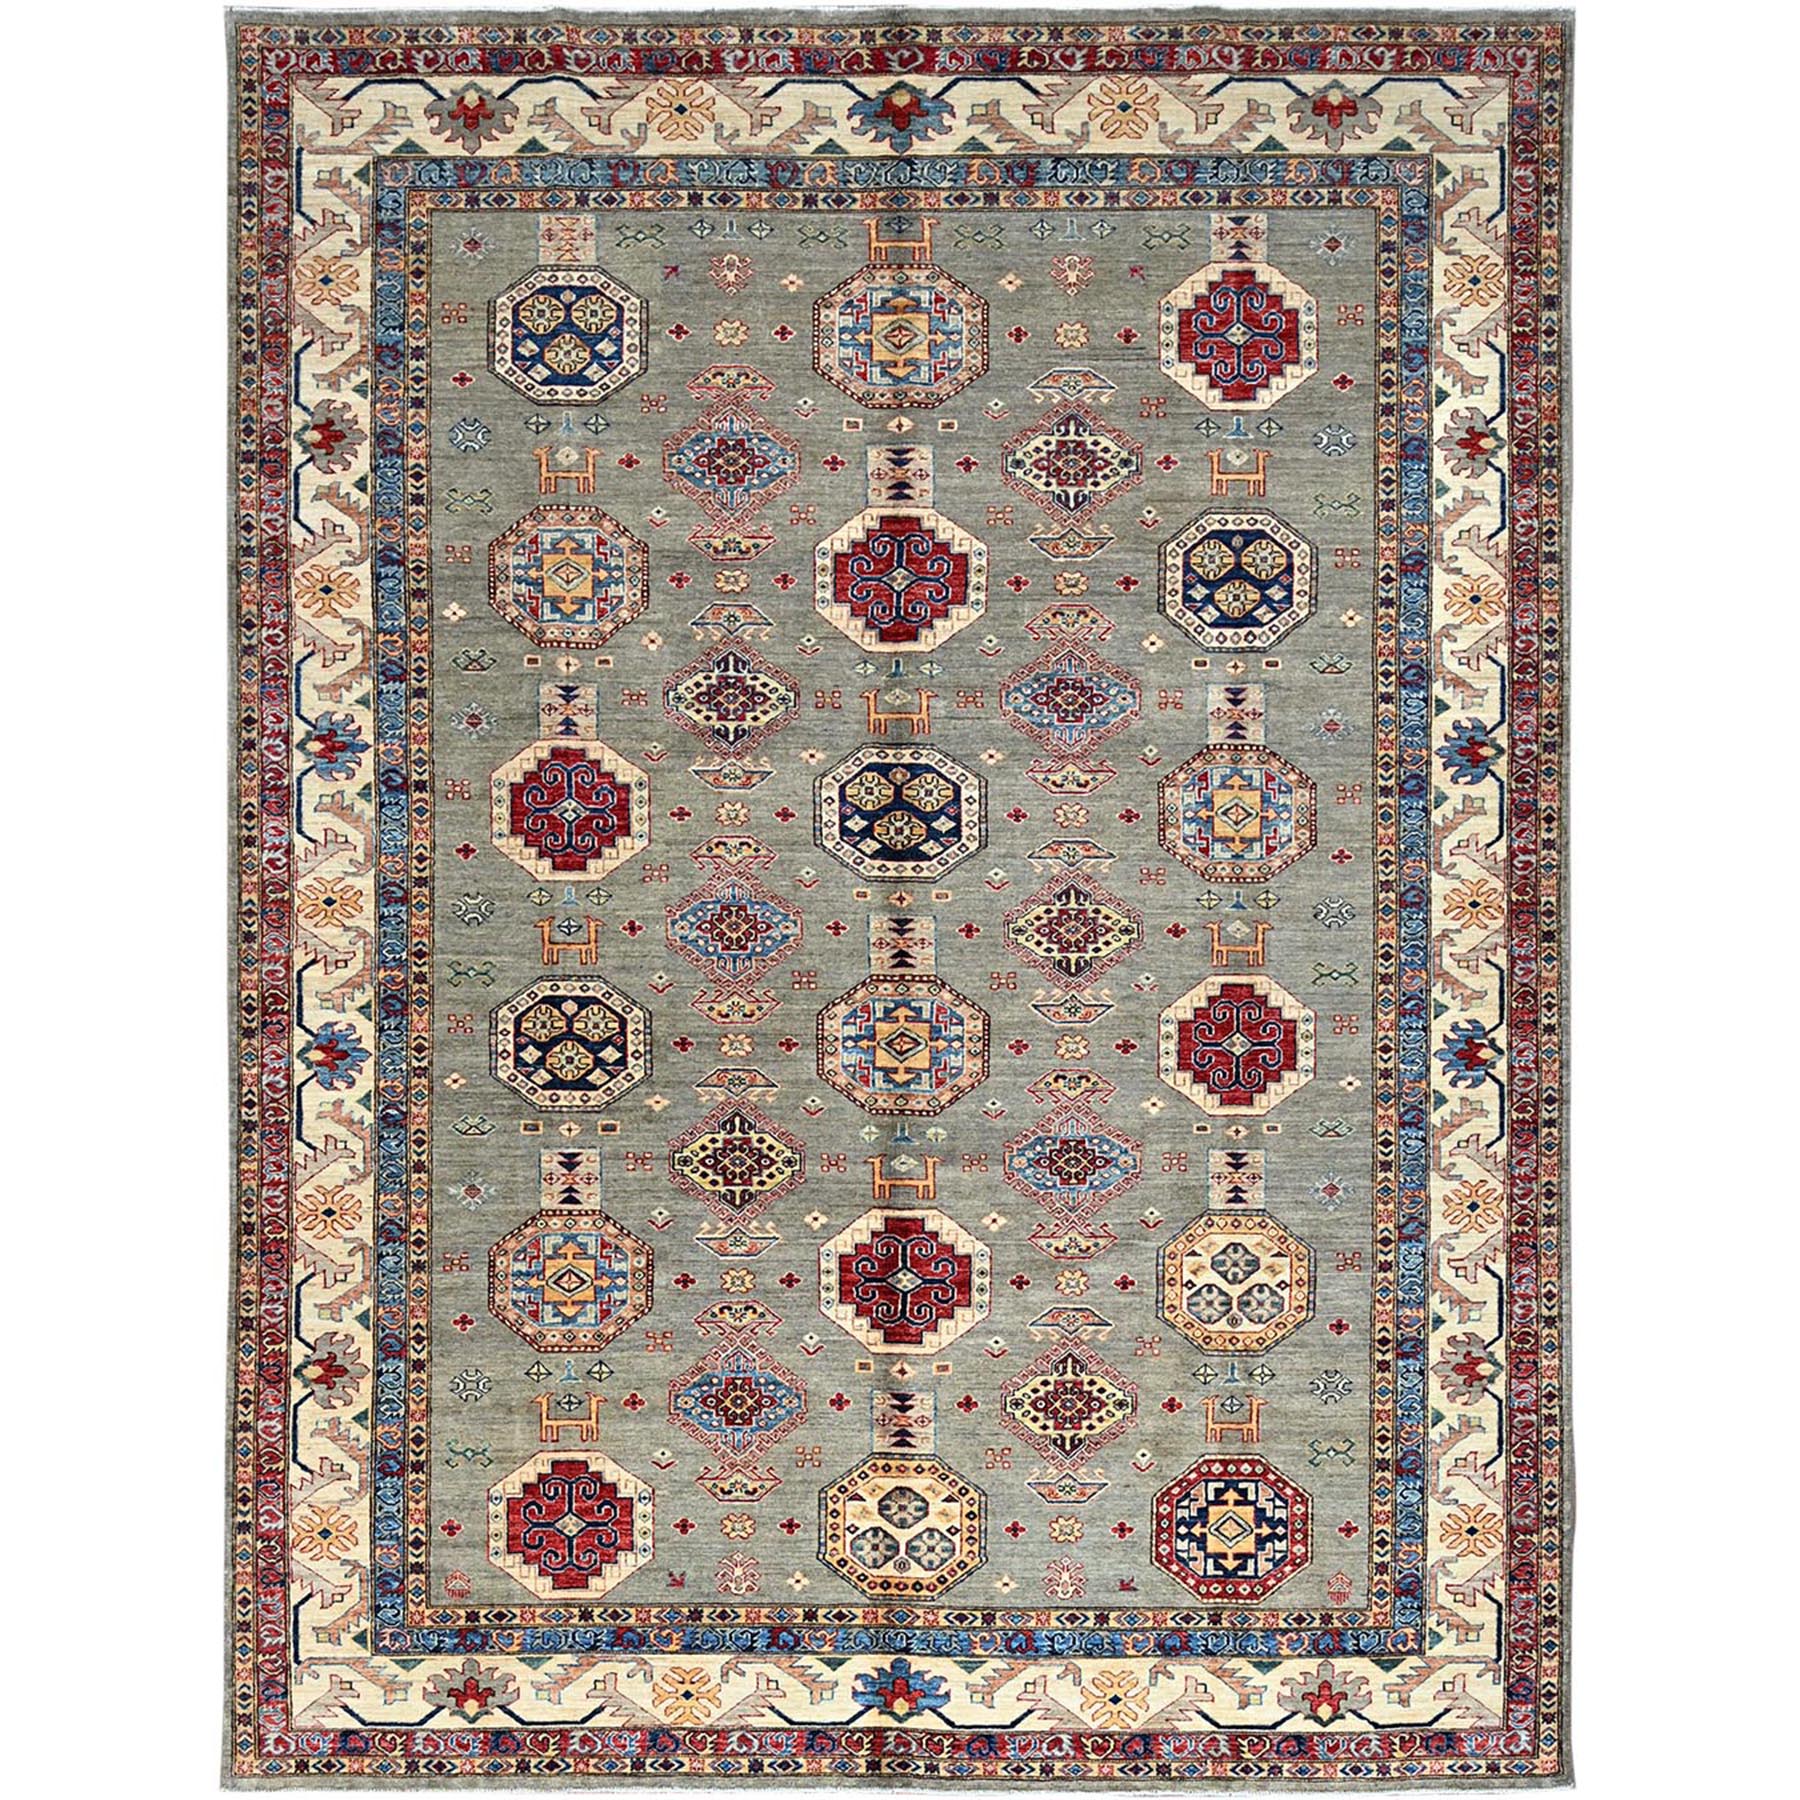 Wrought Iron Gray and Shoji White, Soft Pure Wool, Vegetable Dyes, Afghan Super Kazak with All Over Medallions, Hand Knotted, Oriental Rug